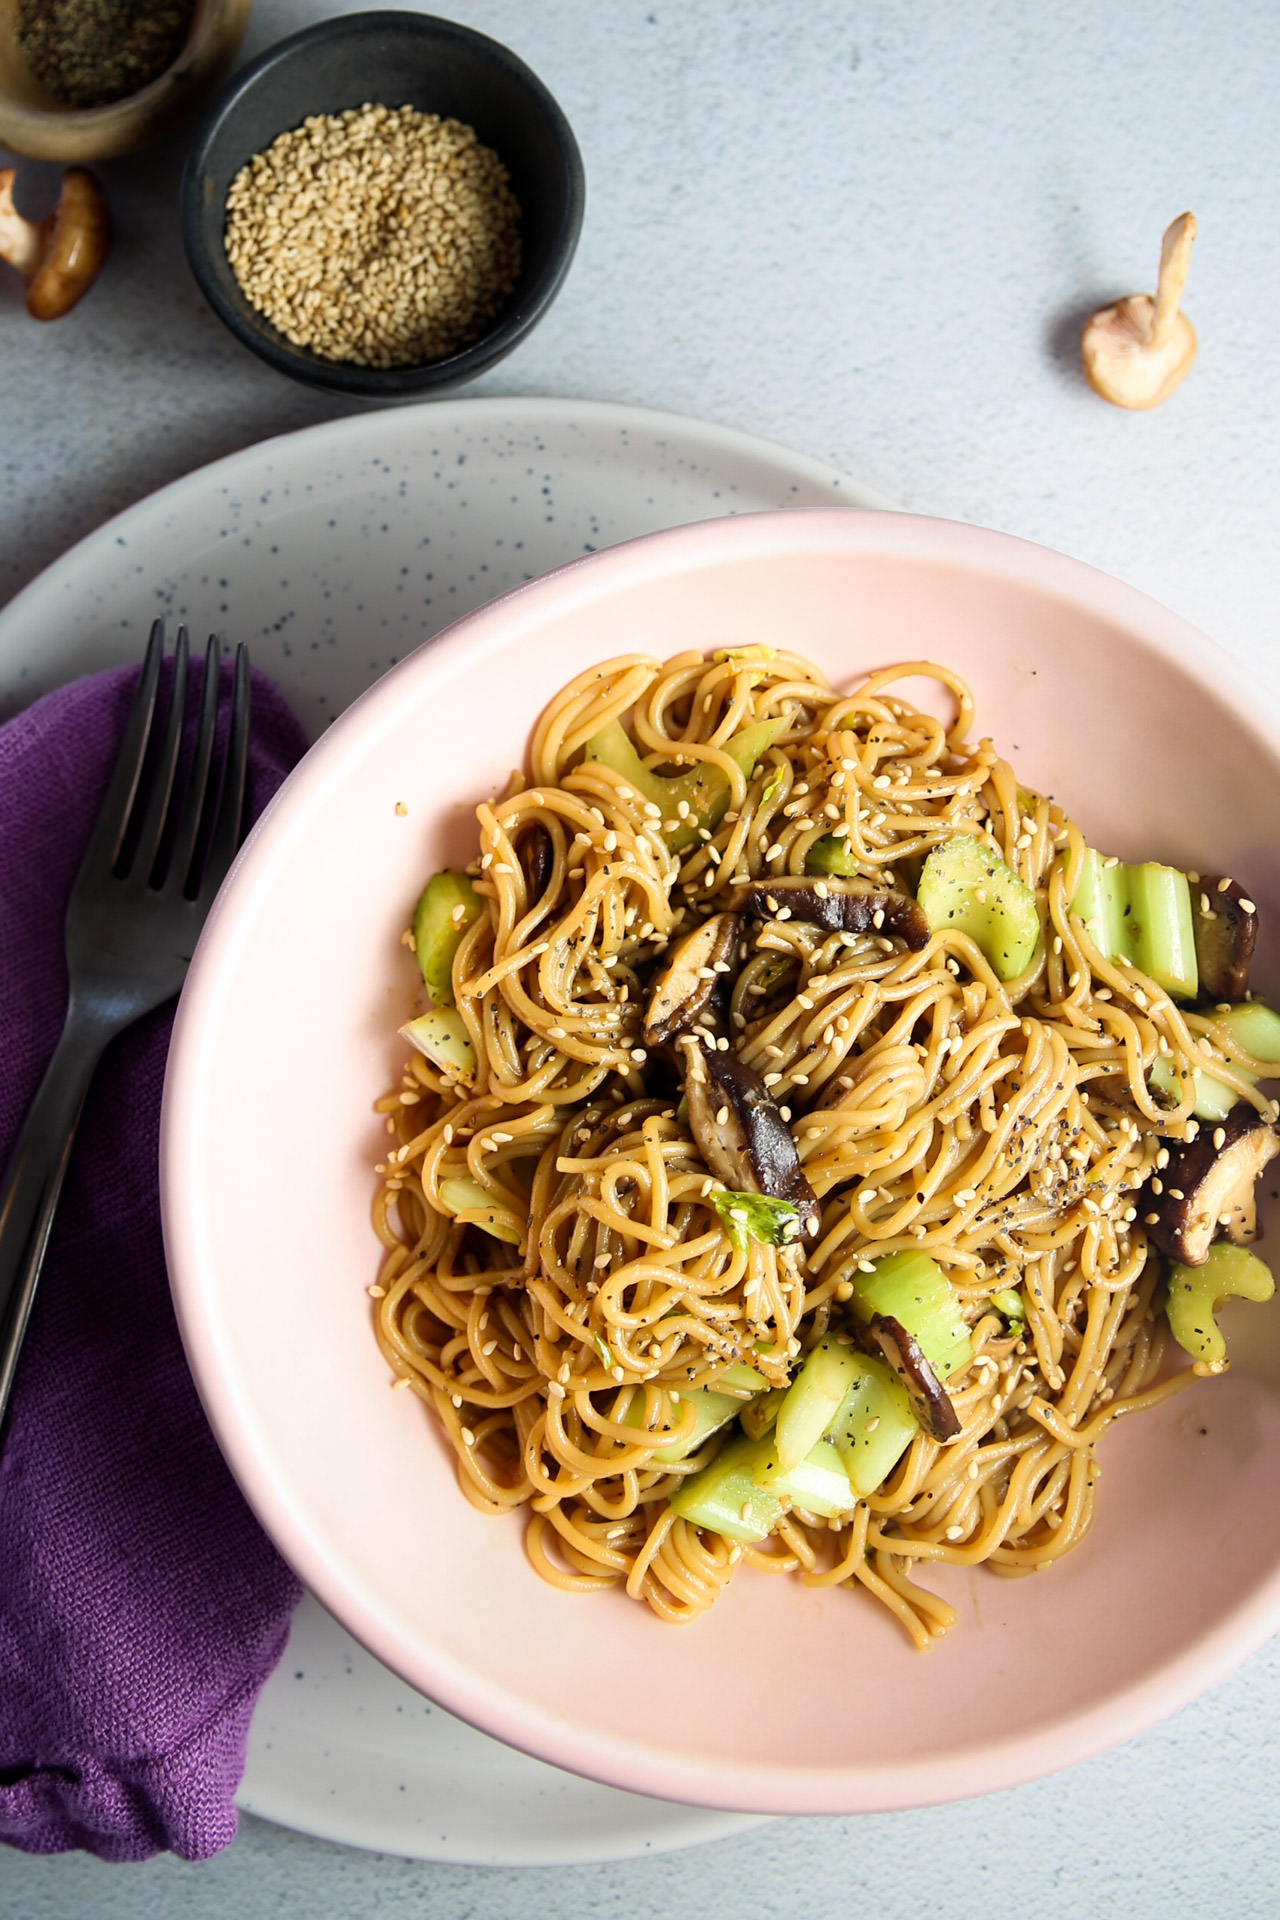 A bowl of noodles with mushrooms and black pepper sprinkled with sesame seeds.